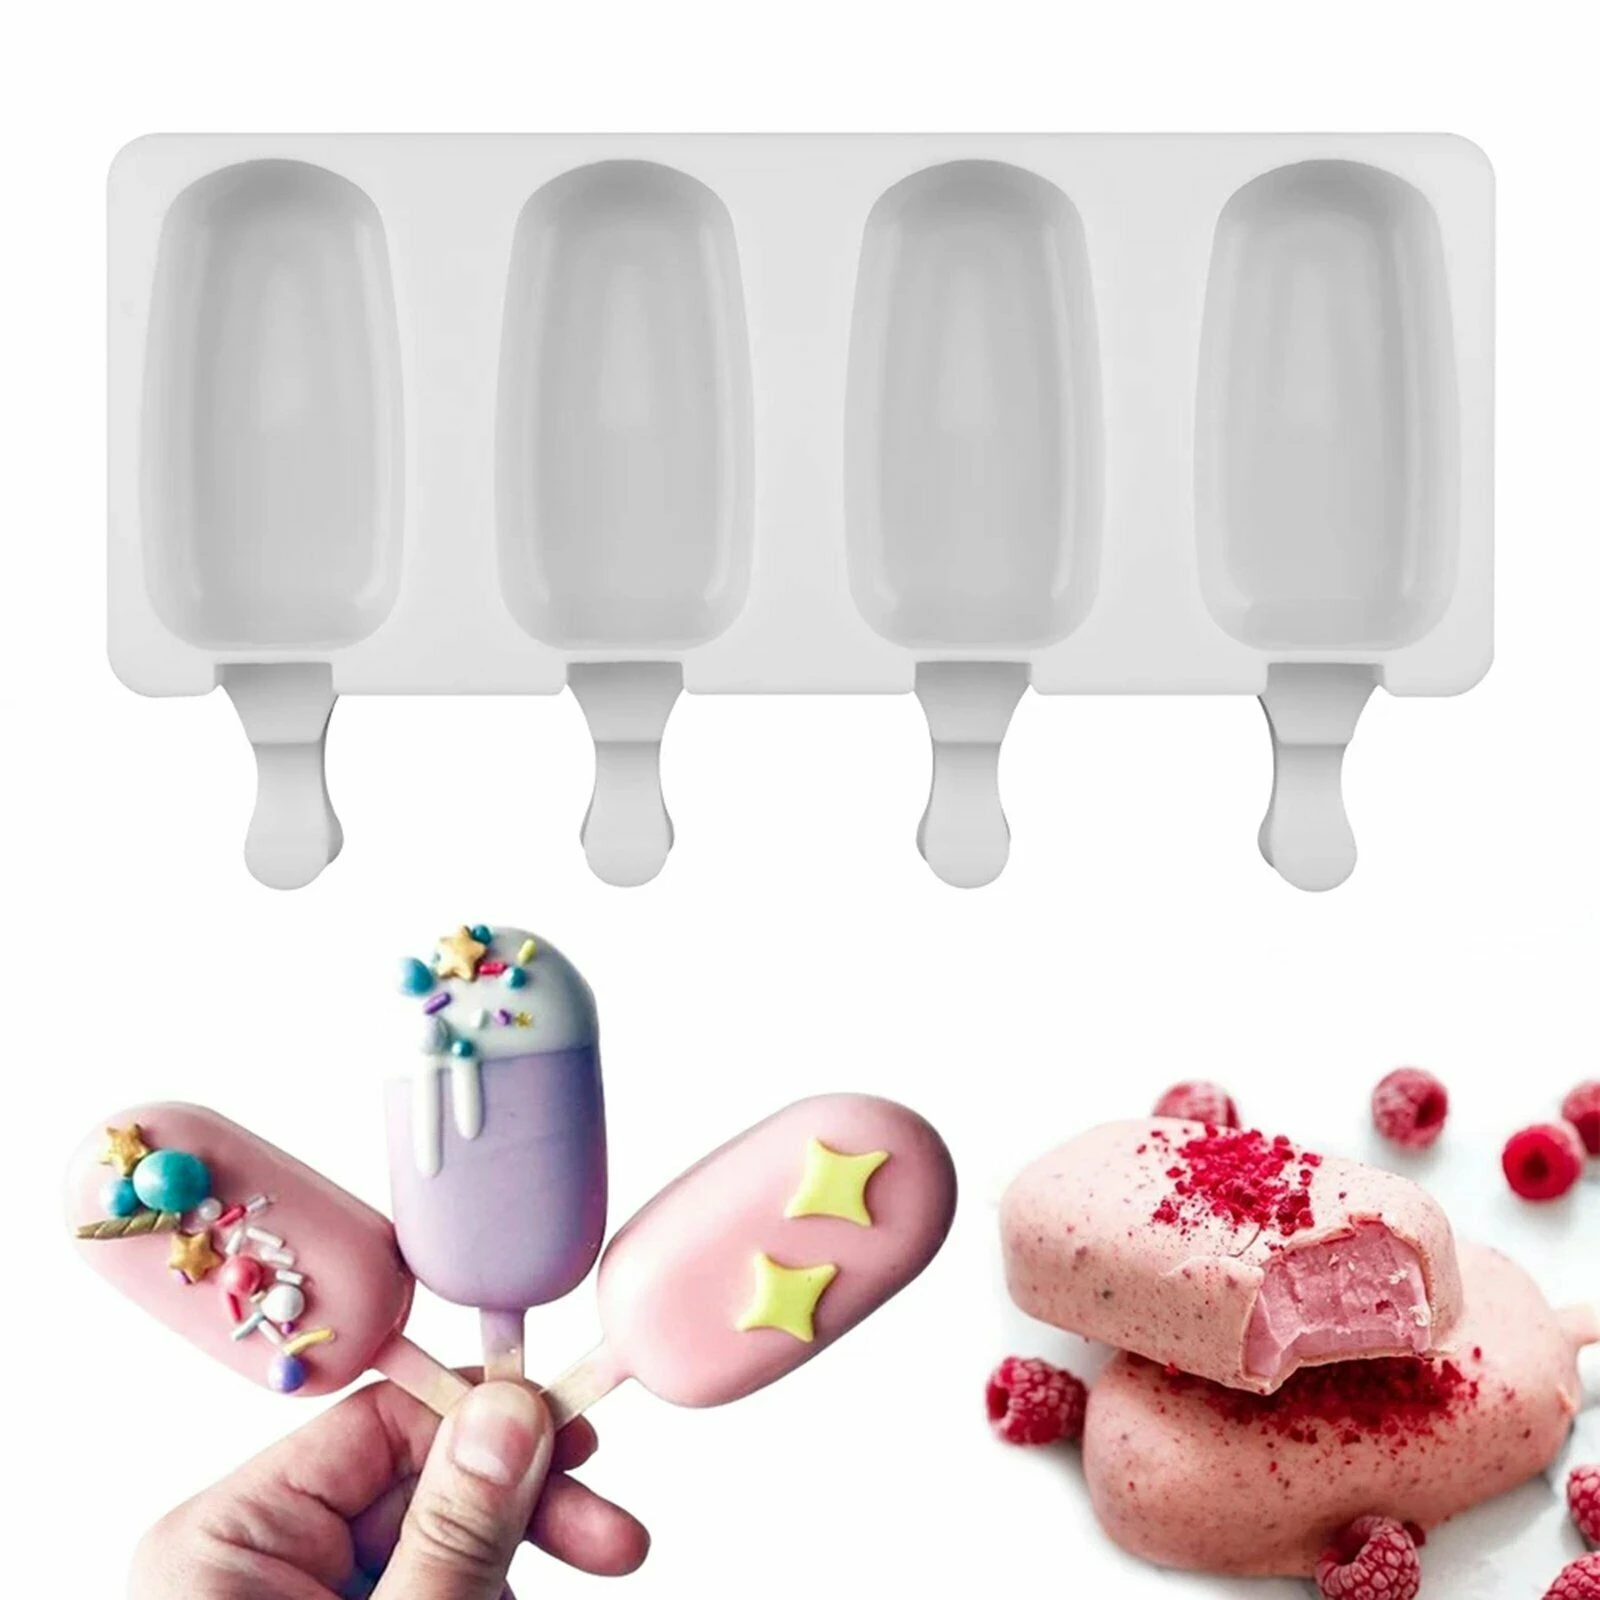 4 Cell Silicone Frozen Ice Cream Mold Juice Popsicle Maker Ice Lolly Pop Mould